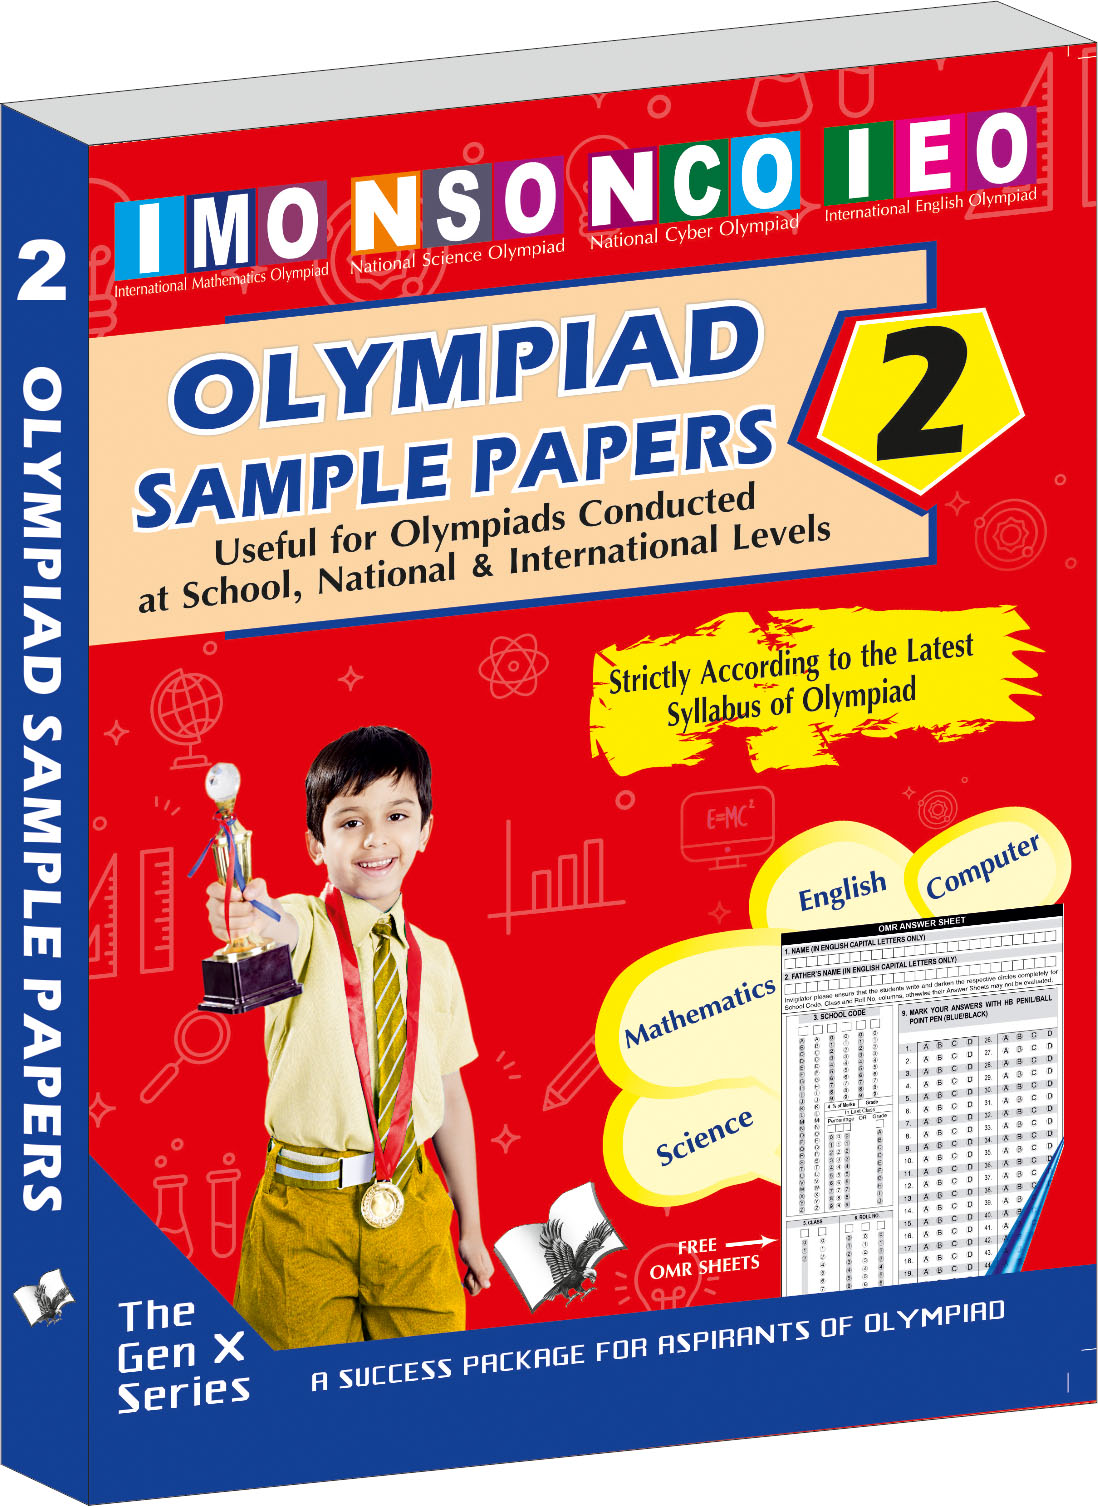 Olympiad Sample Paper 2-Useful for Olympiad conducted at School, National & International levels